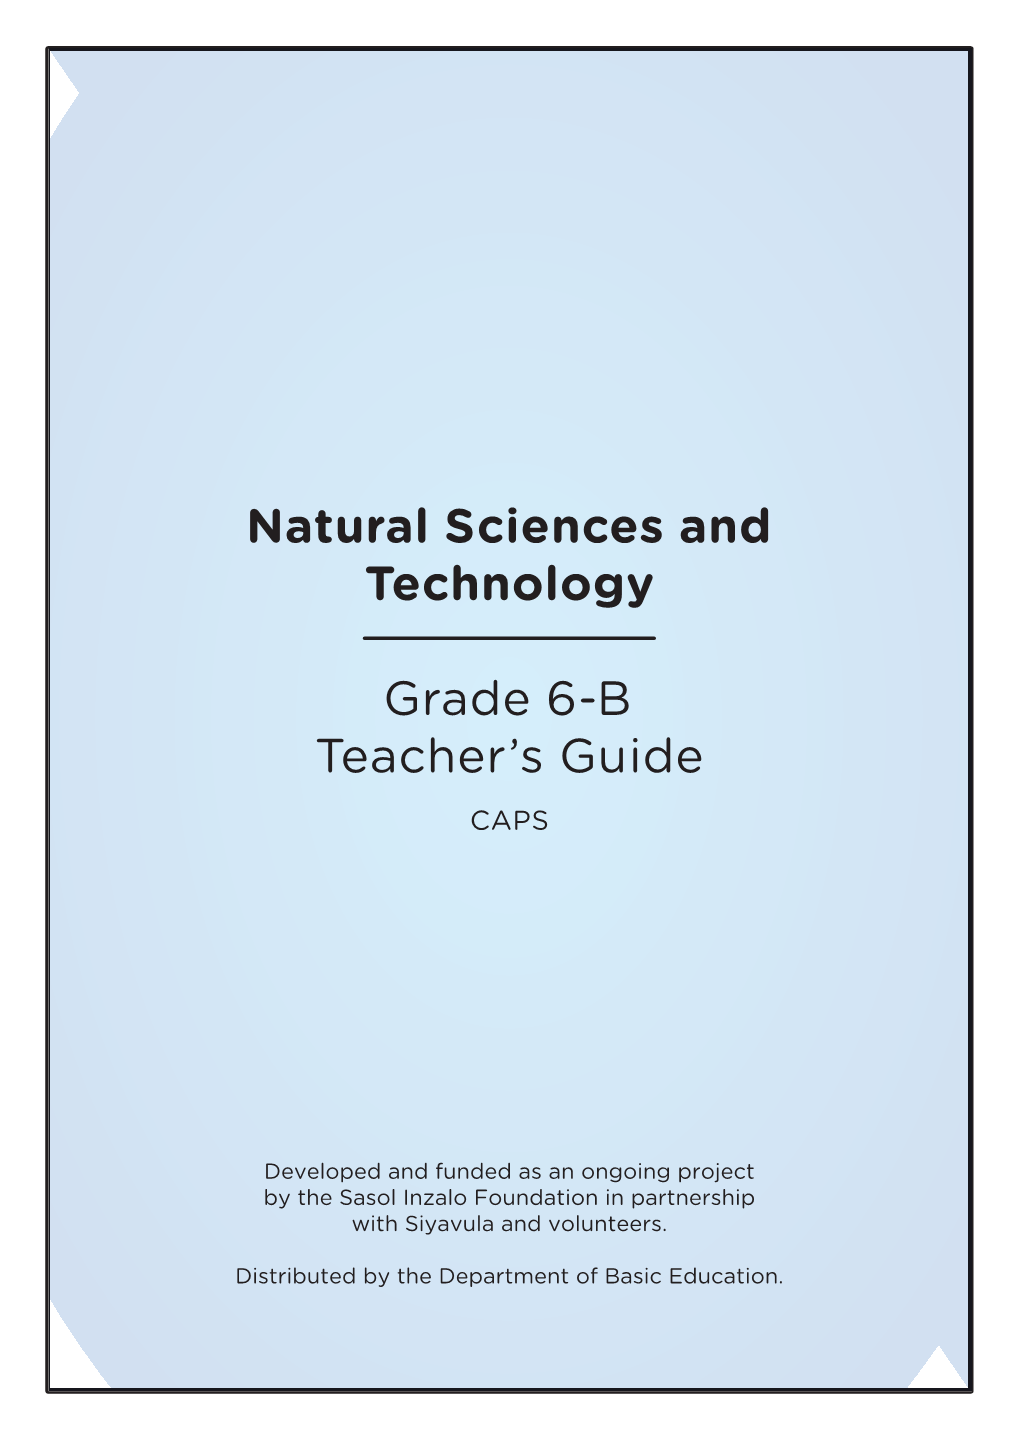 Natural Sciences and Technology Grade 6-B Teacher's Guide